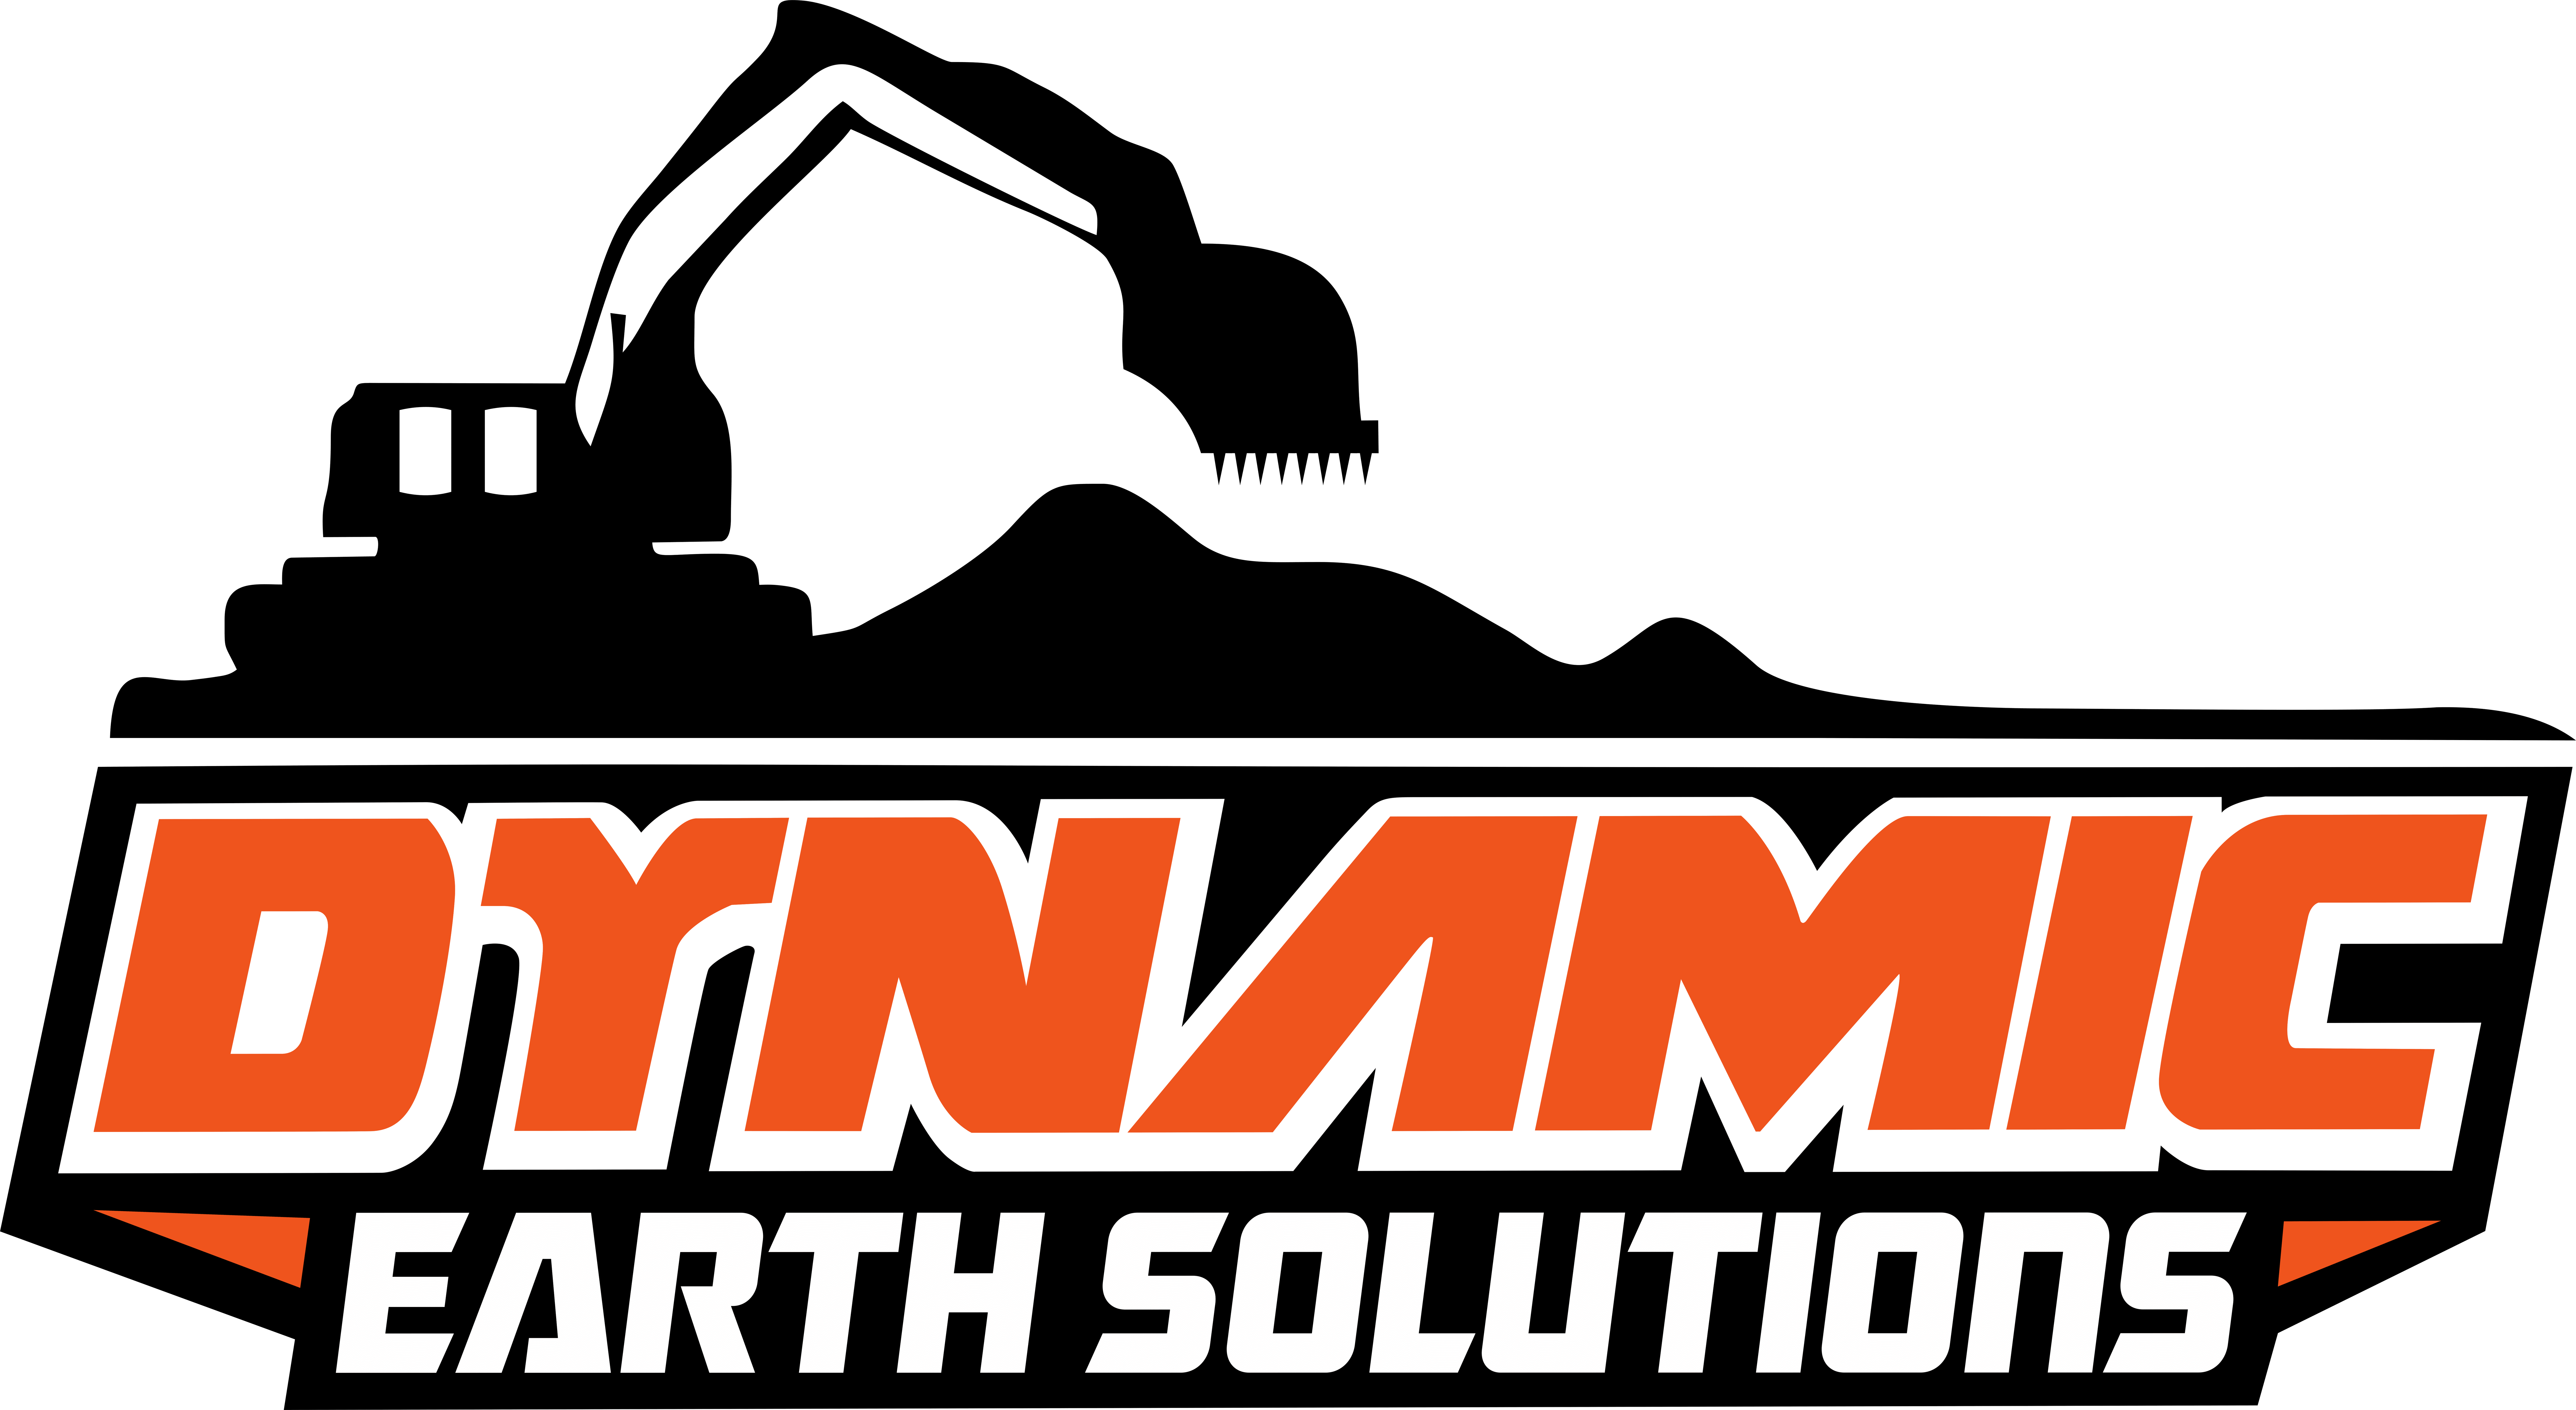 Logo of Dynamic Earth Solutions featuring an abstract earth and machinery graphic.